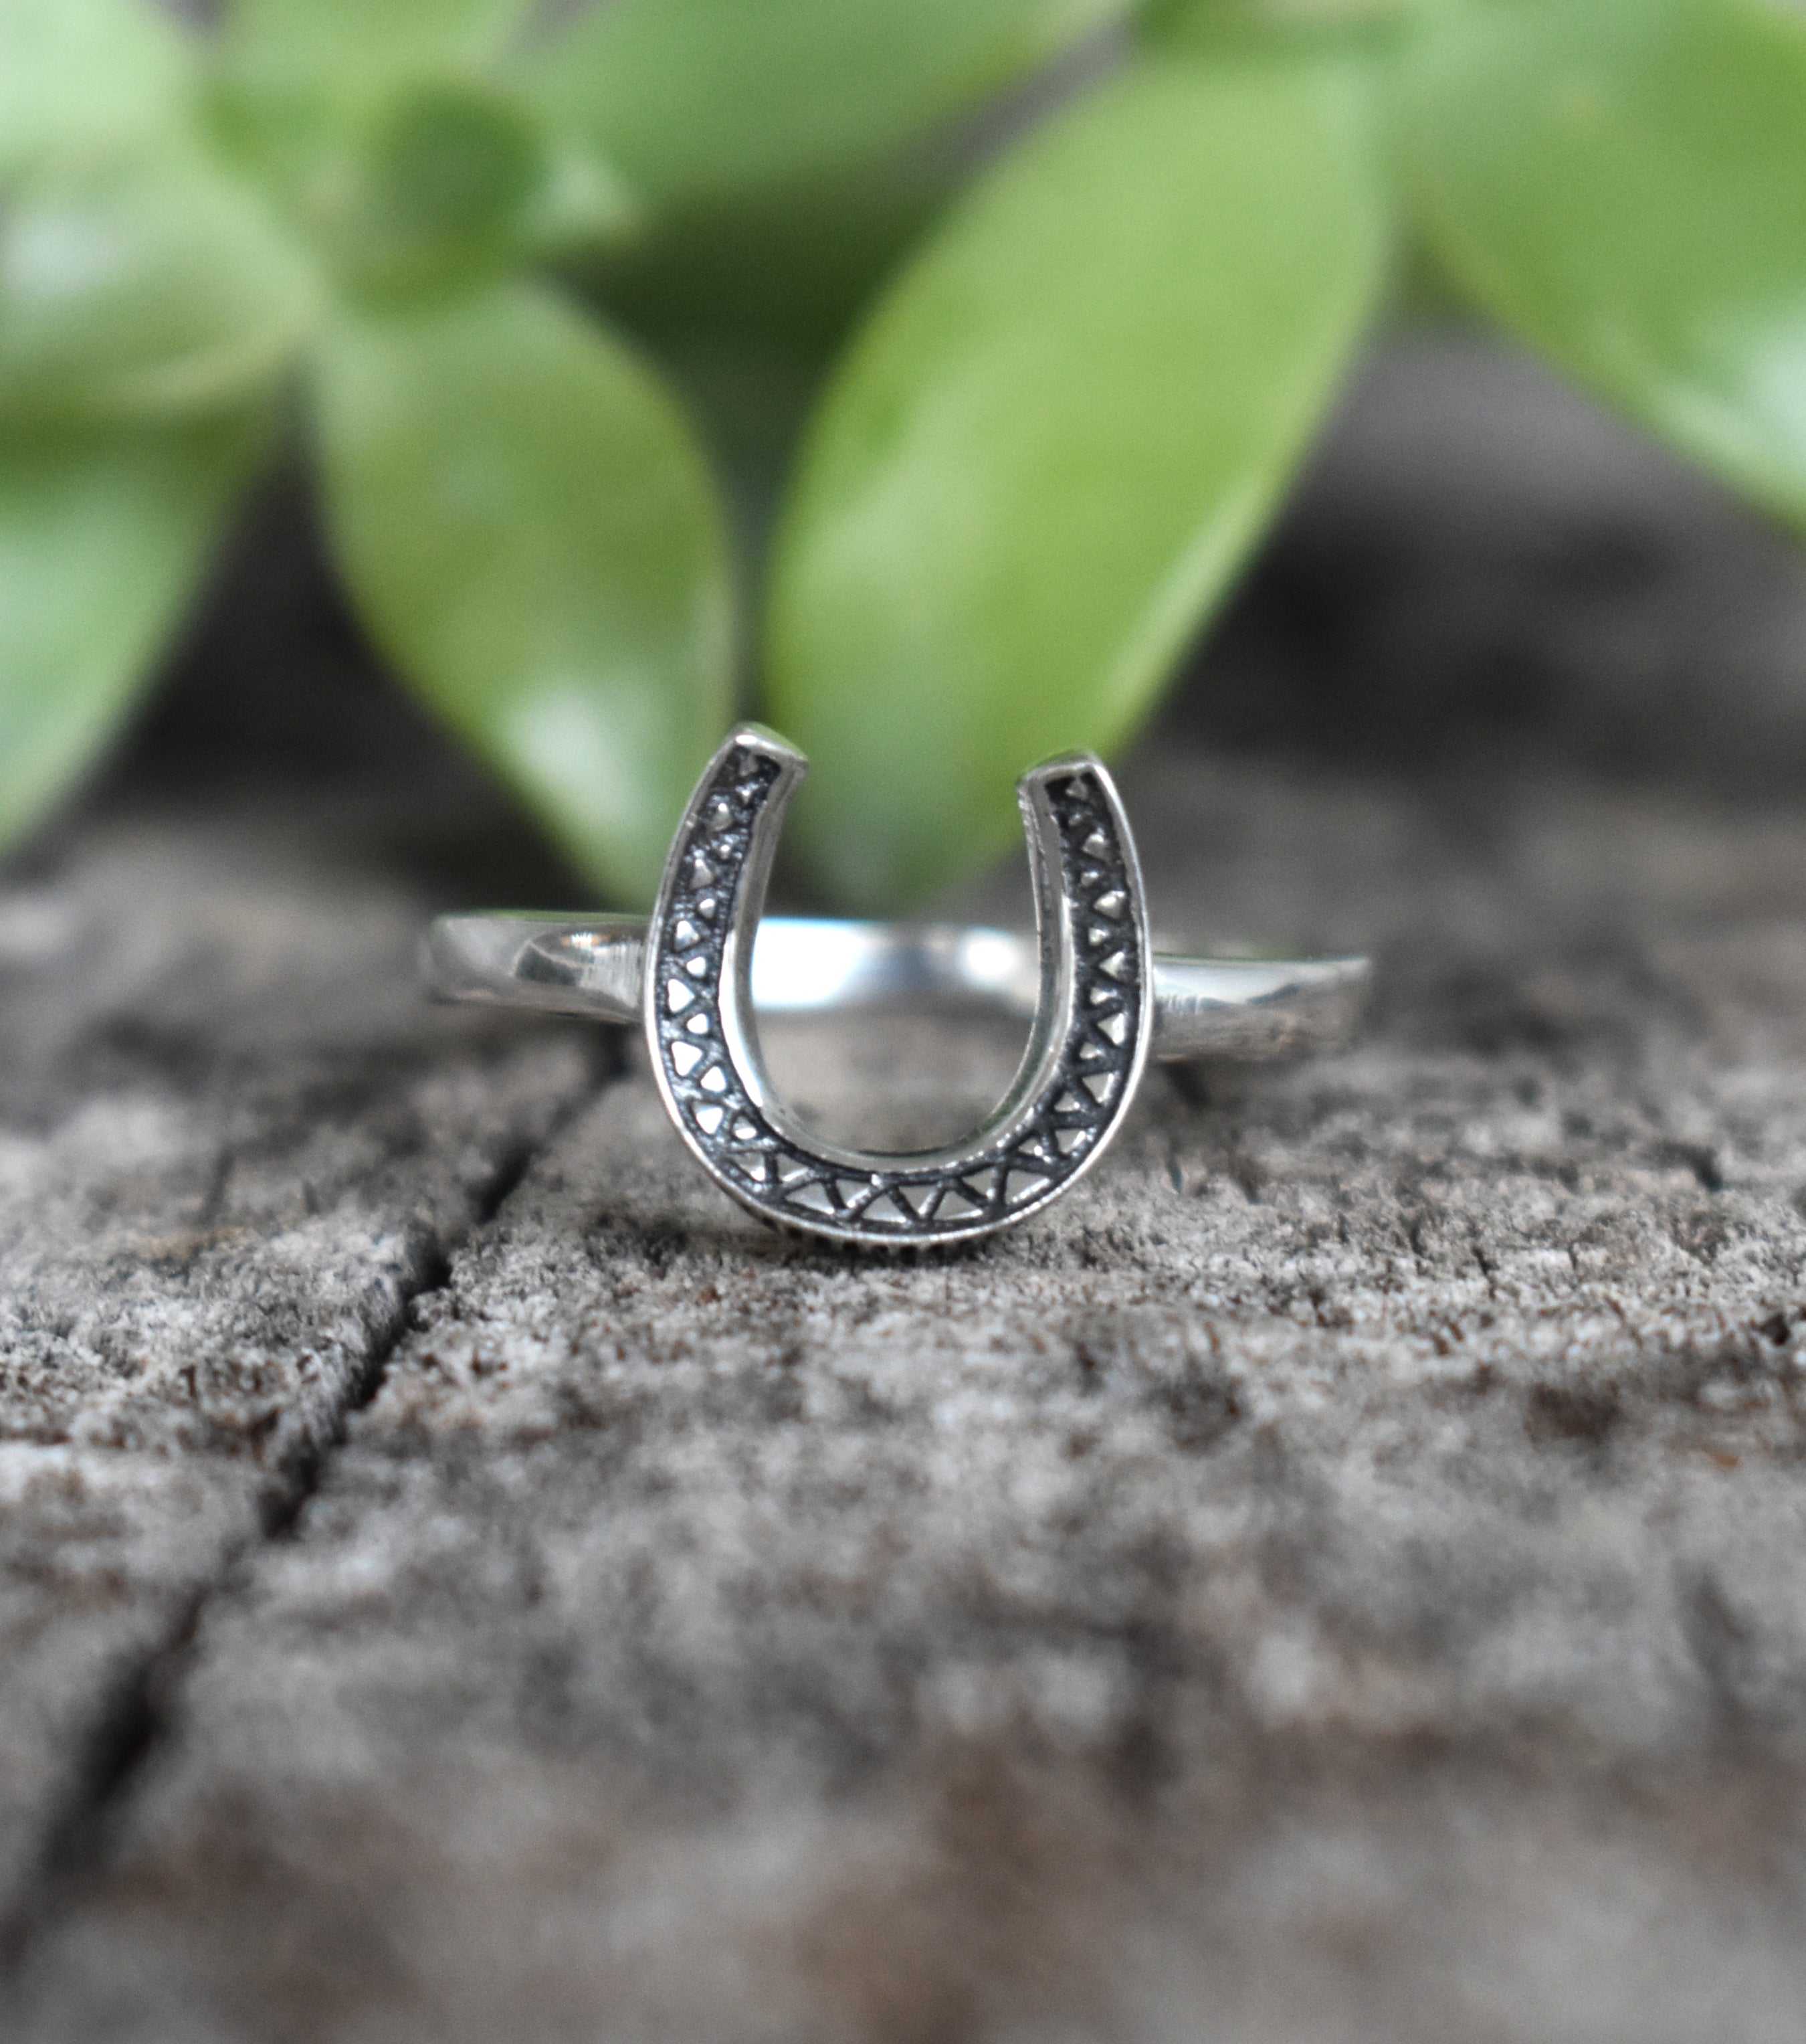 LOX & CHAIN GOOD LUCK RING - SILVER 925 – Bones Clubhouse